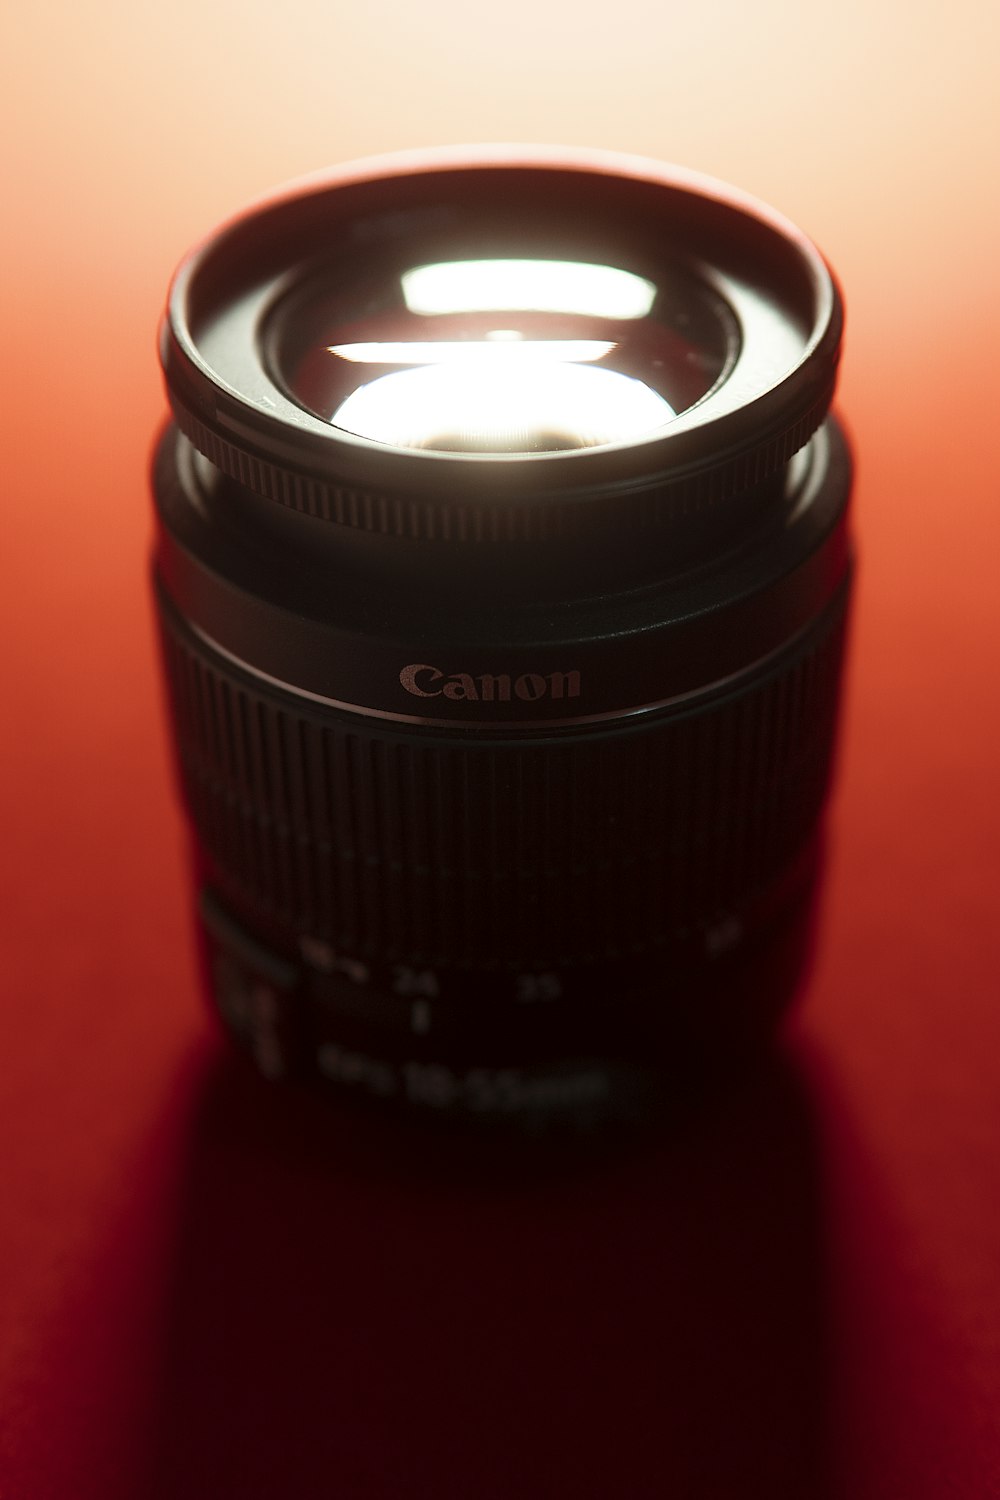 black Canon camera lens on red surface